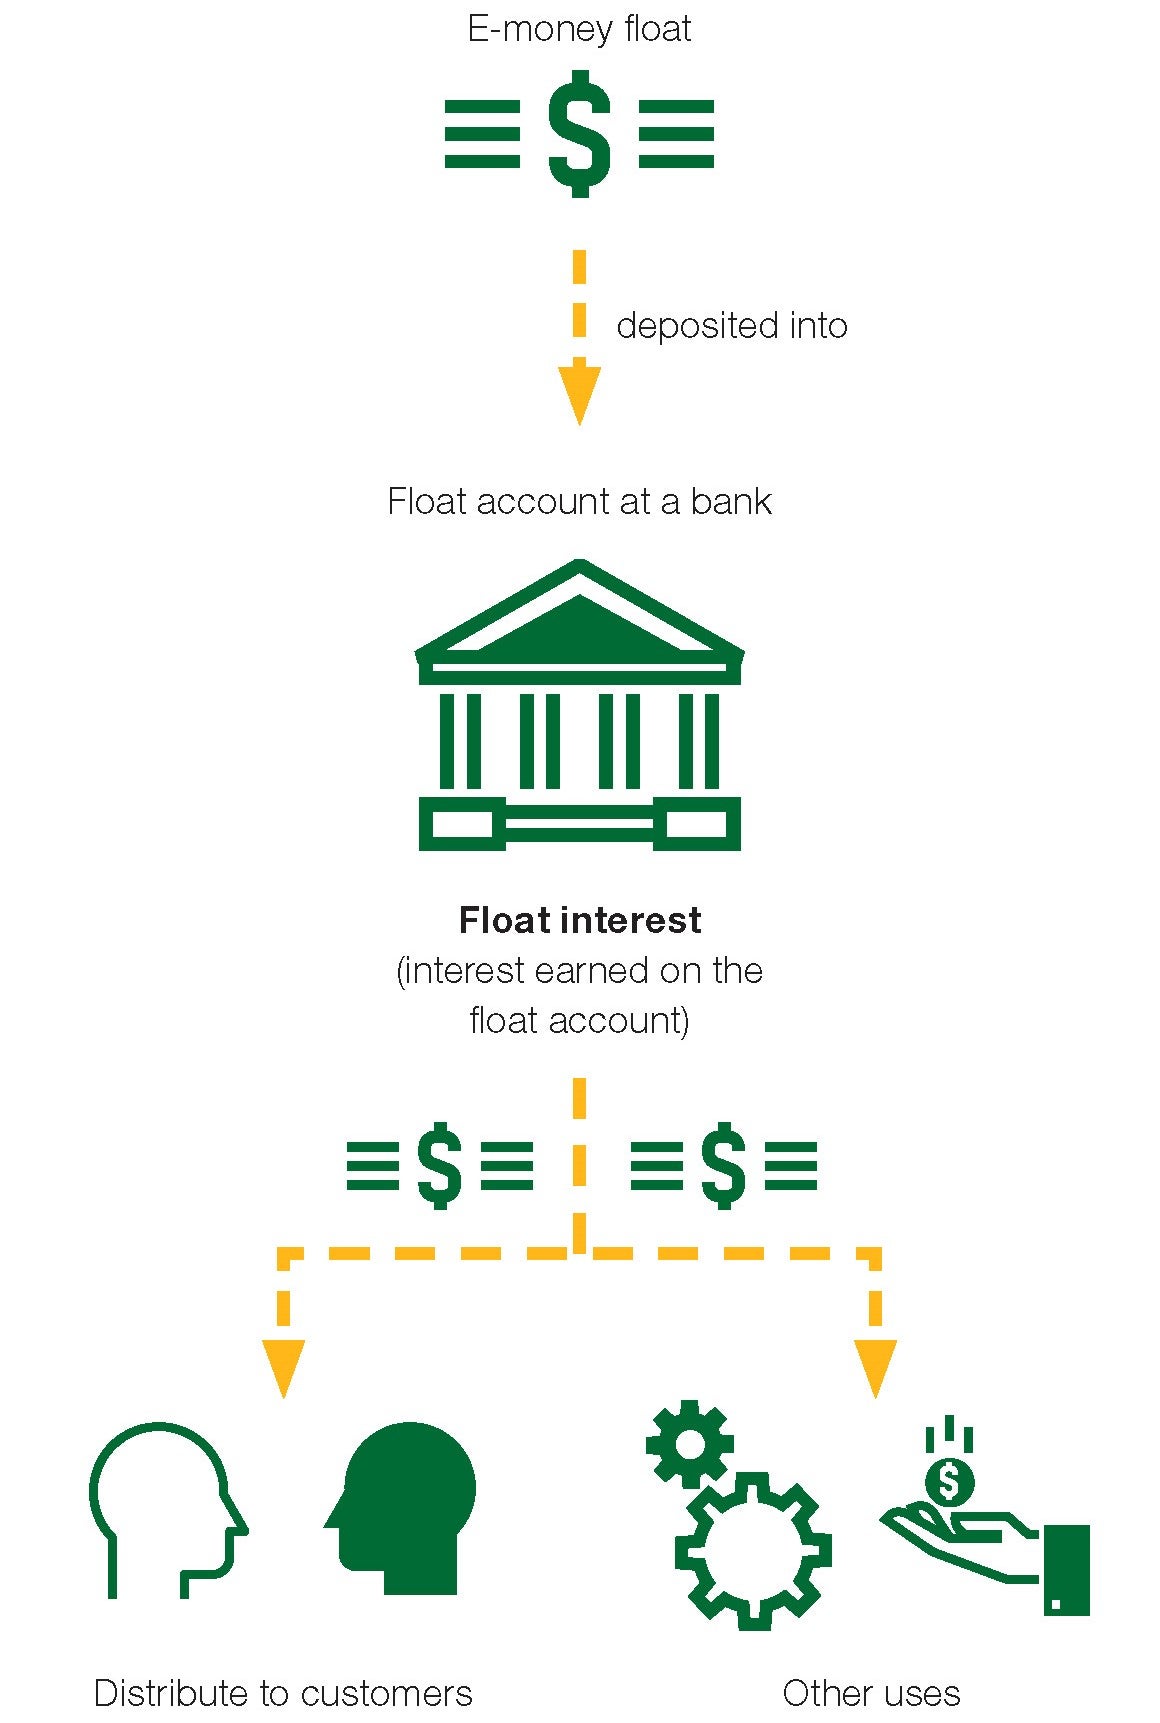 Figure 1. The accrual and use of float interest